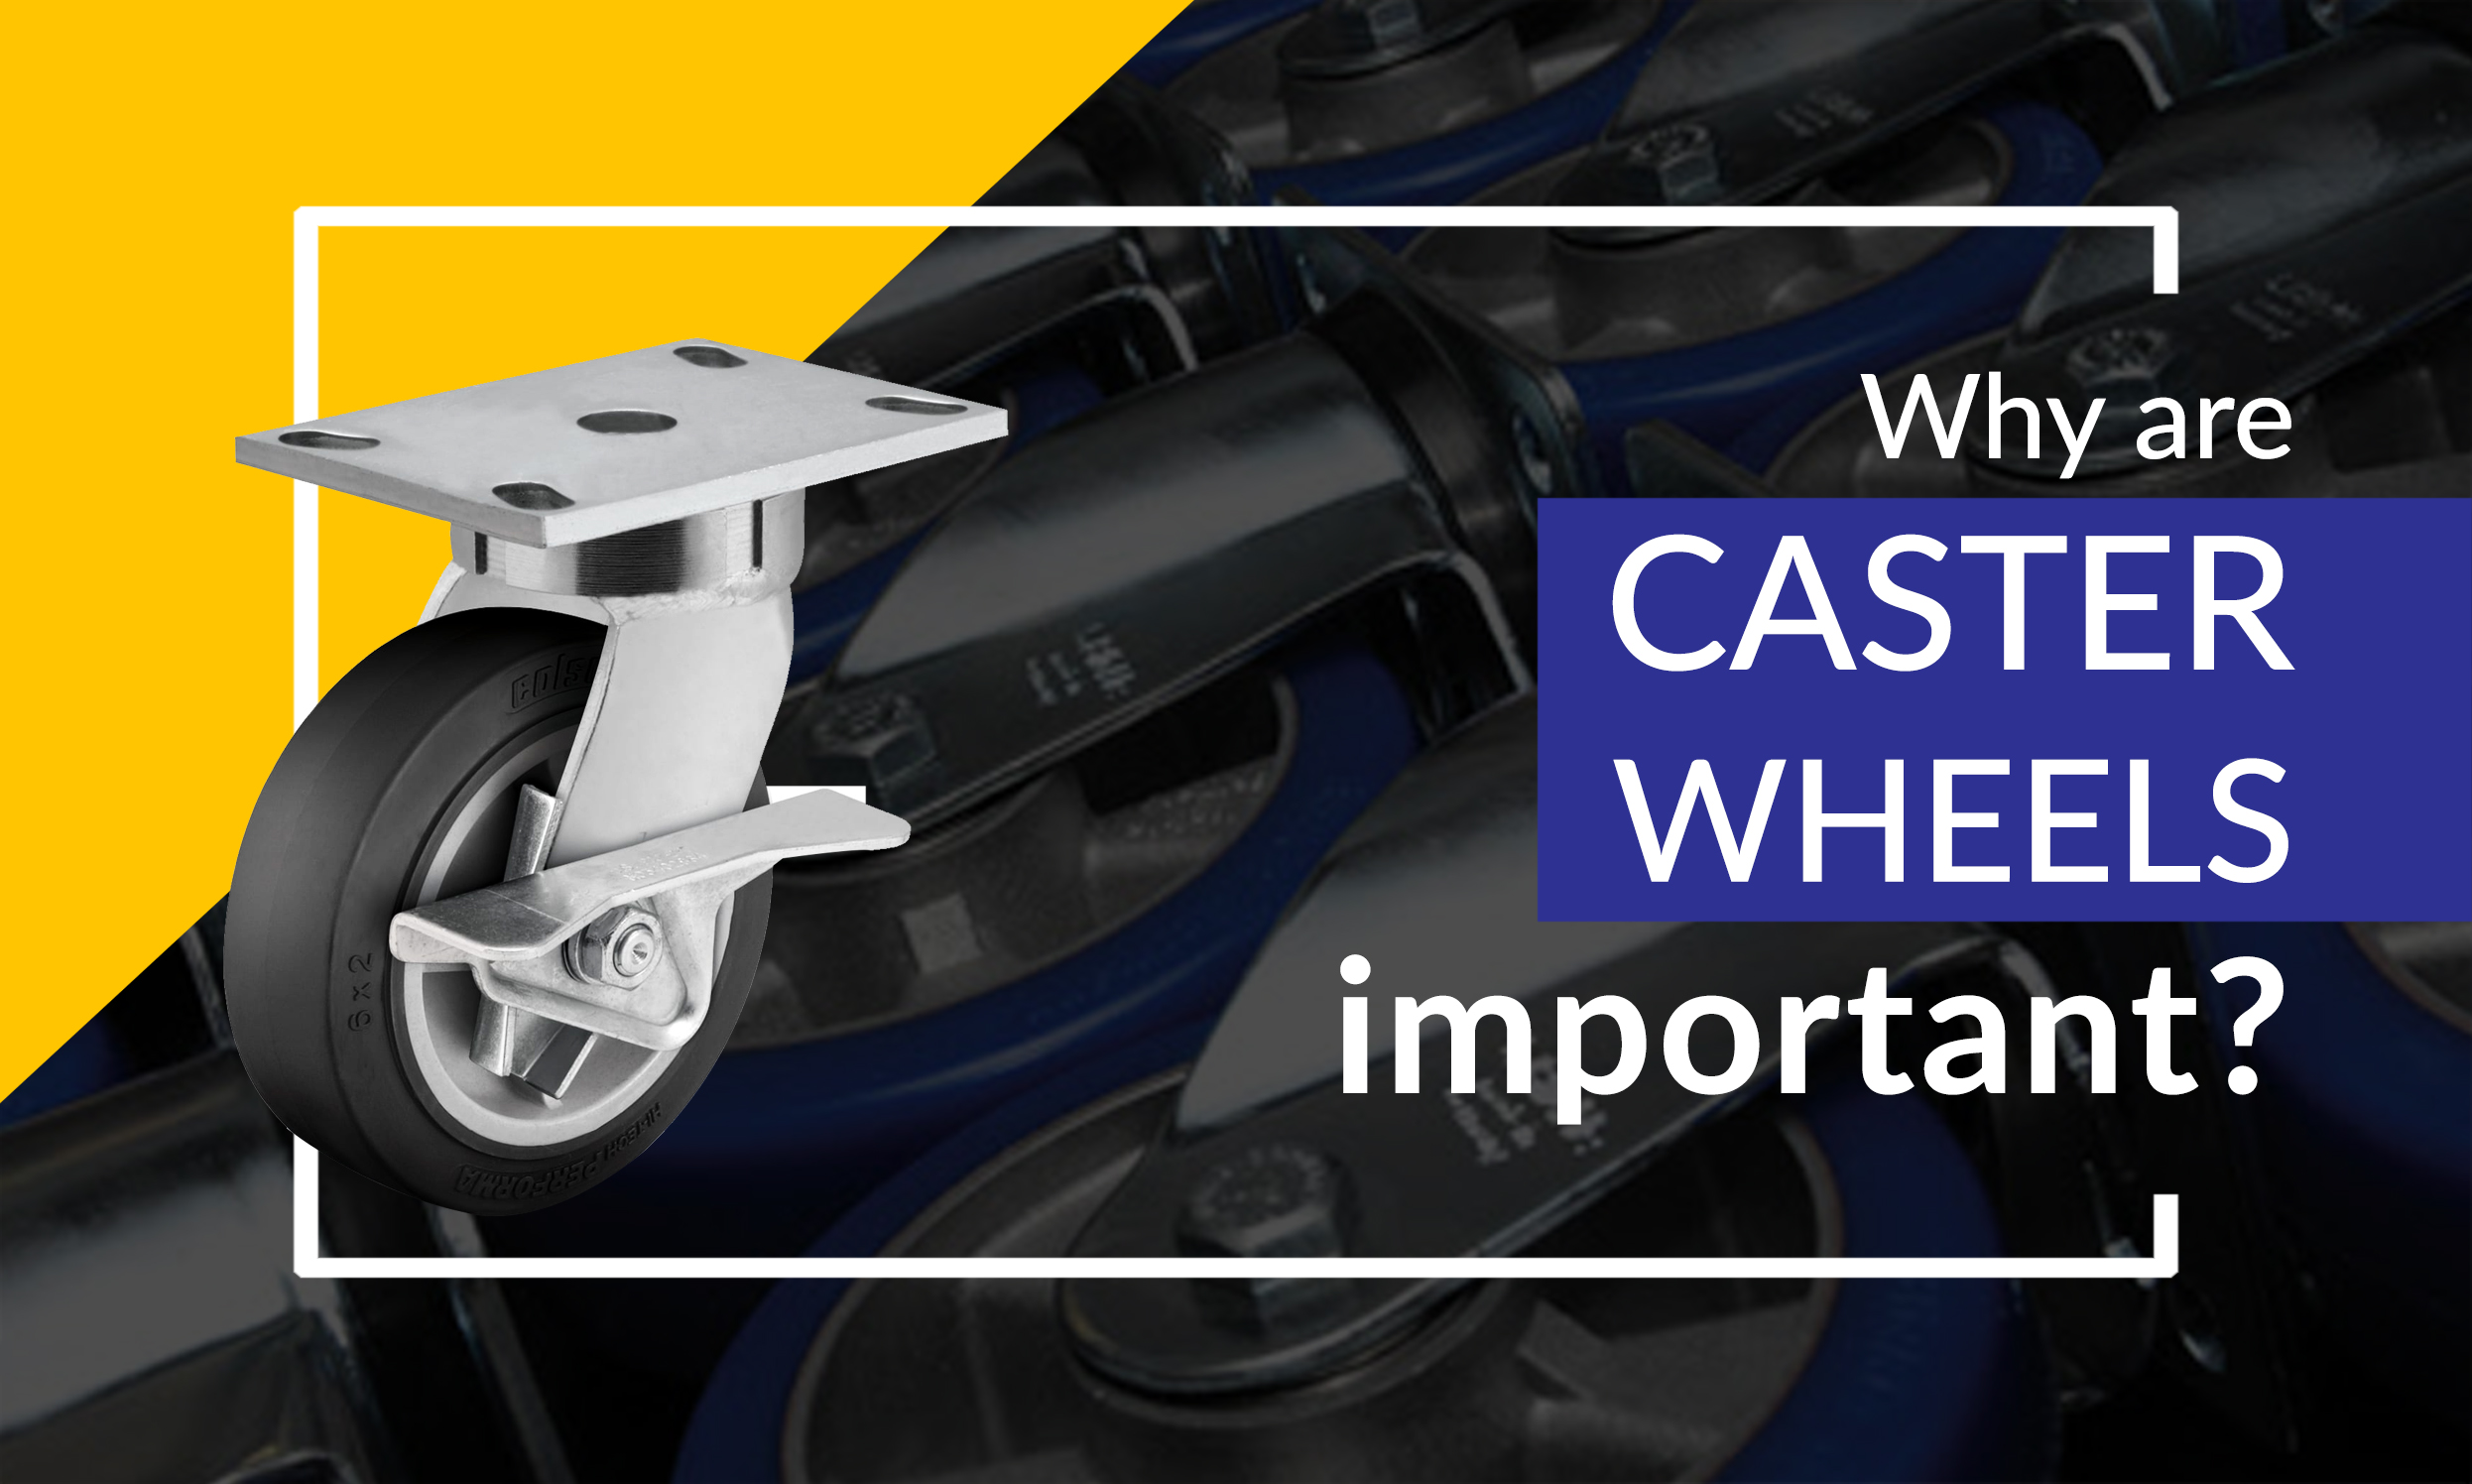 Why are castor wheels important?